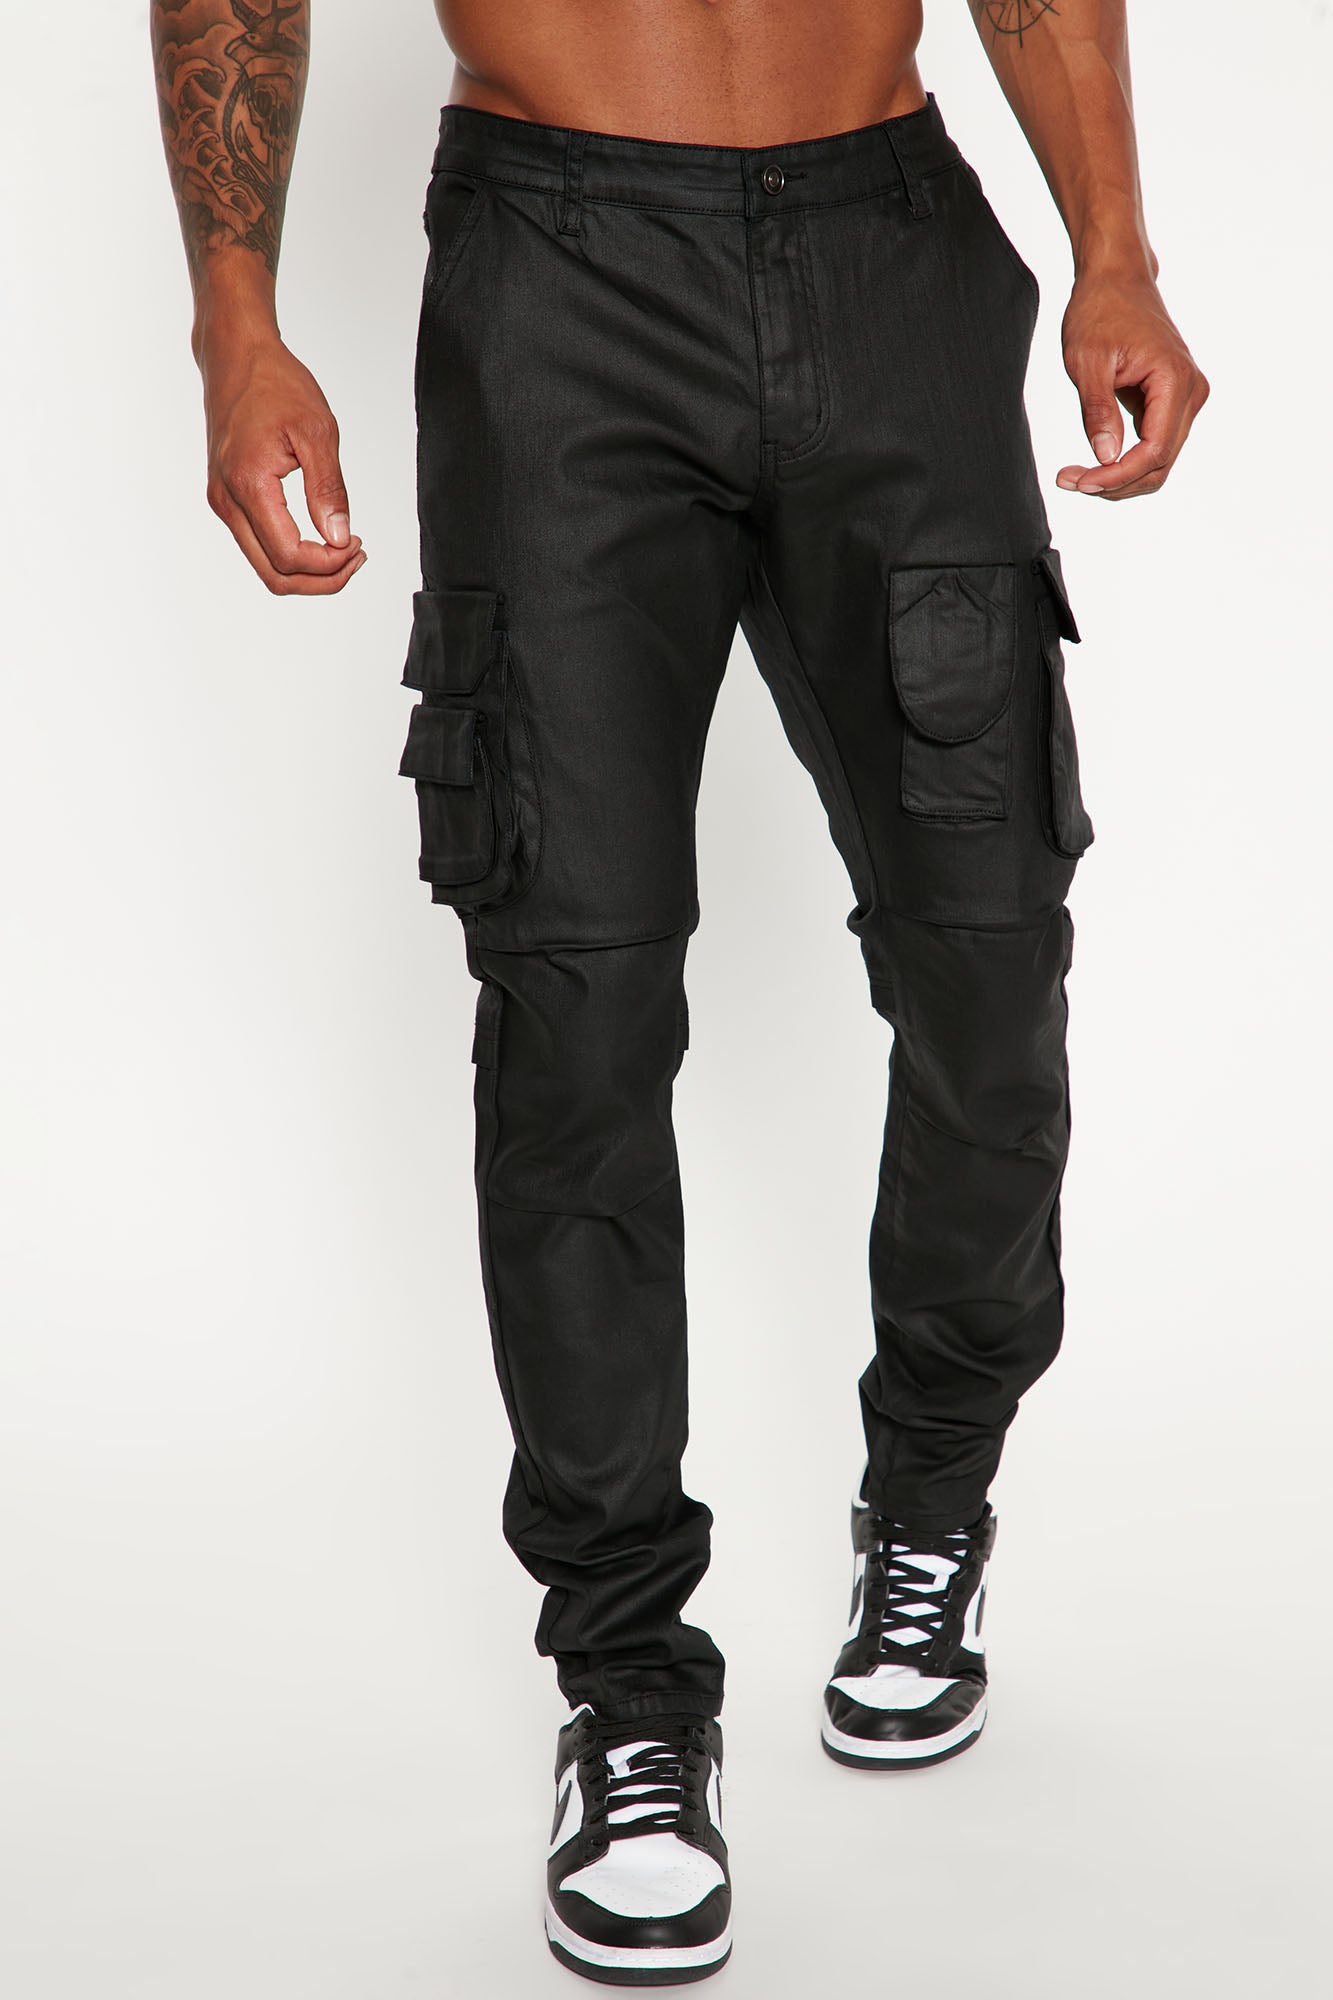 HIGH STRETCH MULTIPOCKET SKINNY CARGO PANTS  cargo pants trousers    Mens High Stretch Multi Pocket Cargo Pants Casual and versatile45130kg  can be worn  By Ivyonlines 01  Facebook